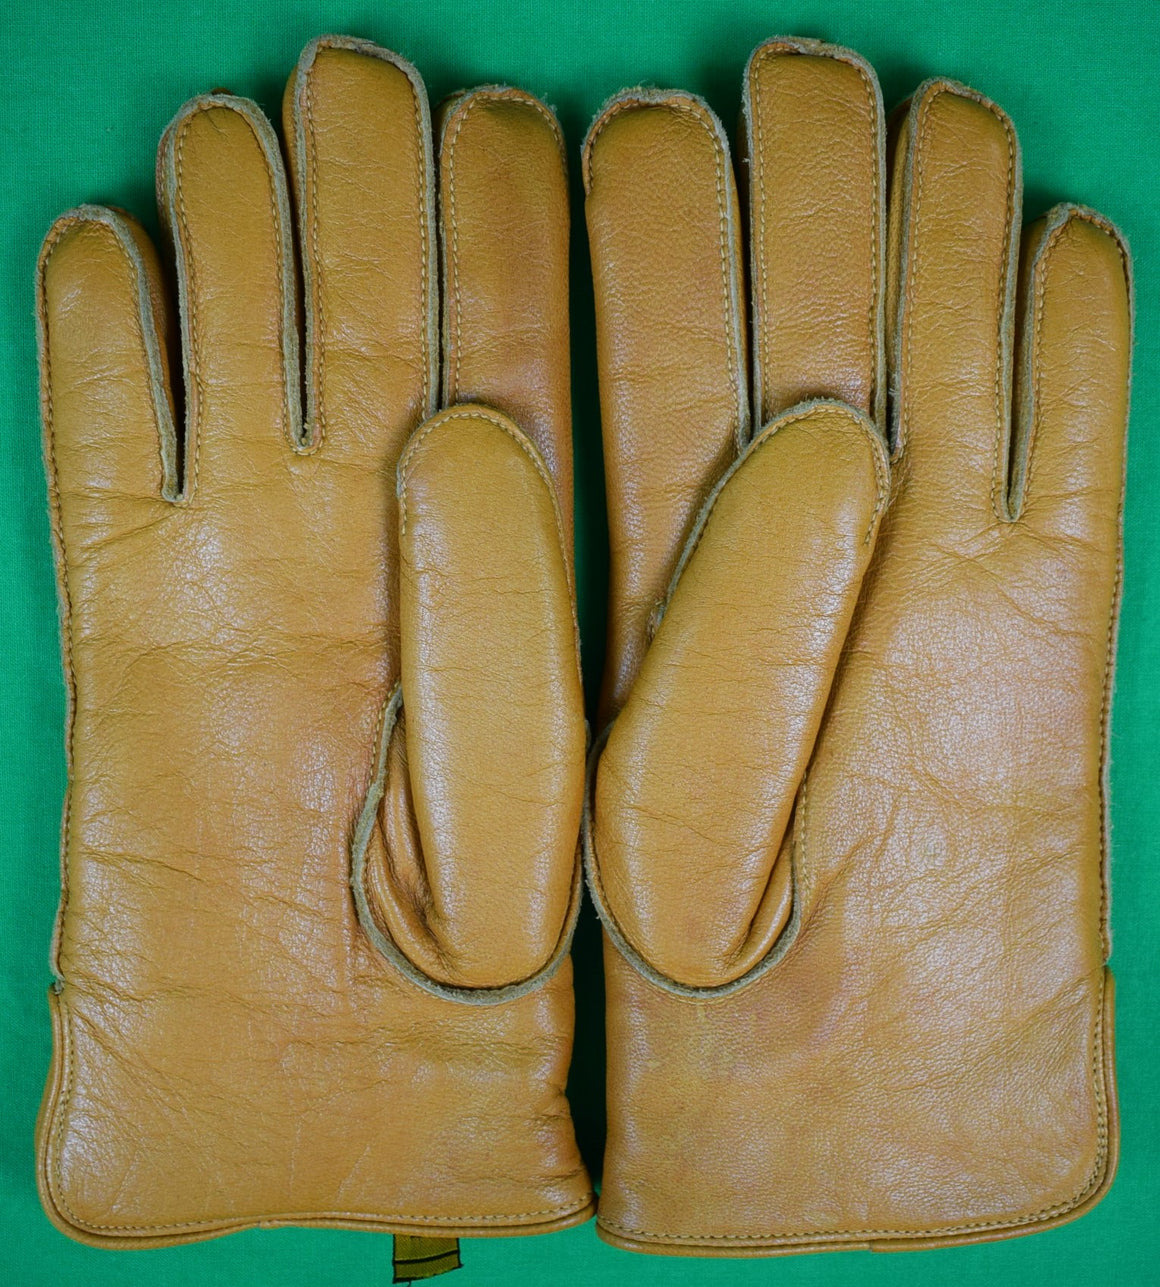 Abercrombie & Fitch British Tan Leather Gloves Sz M